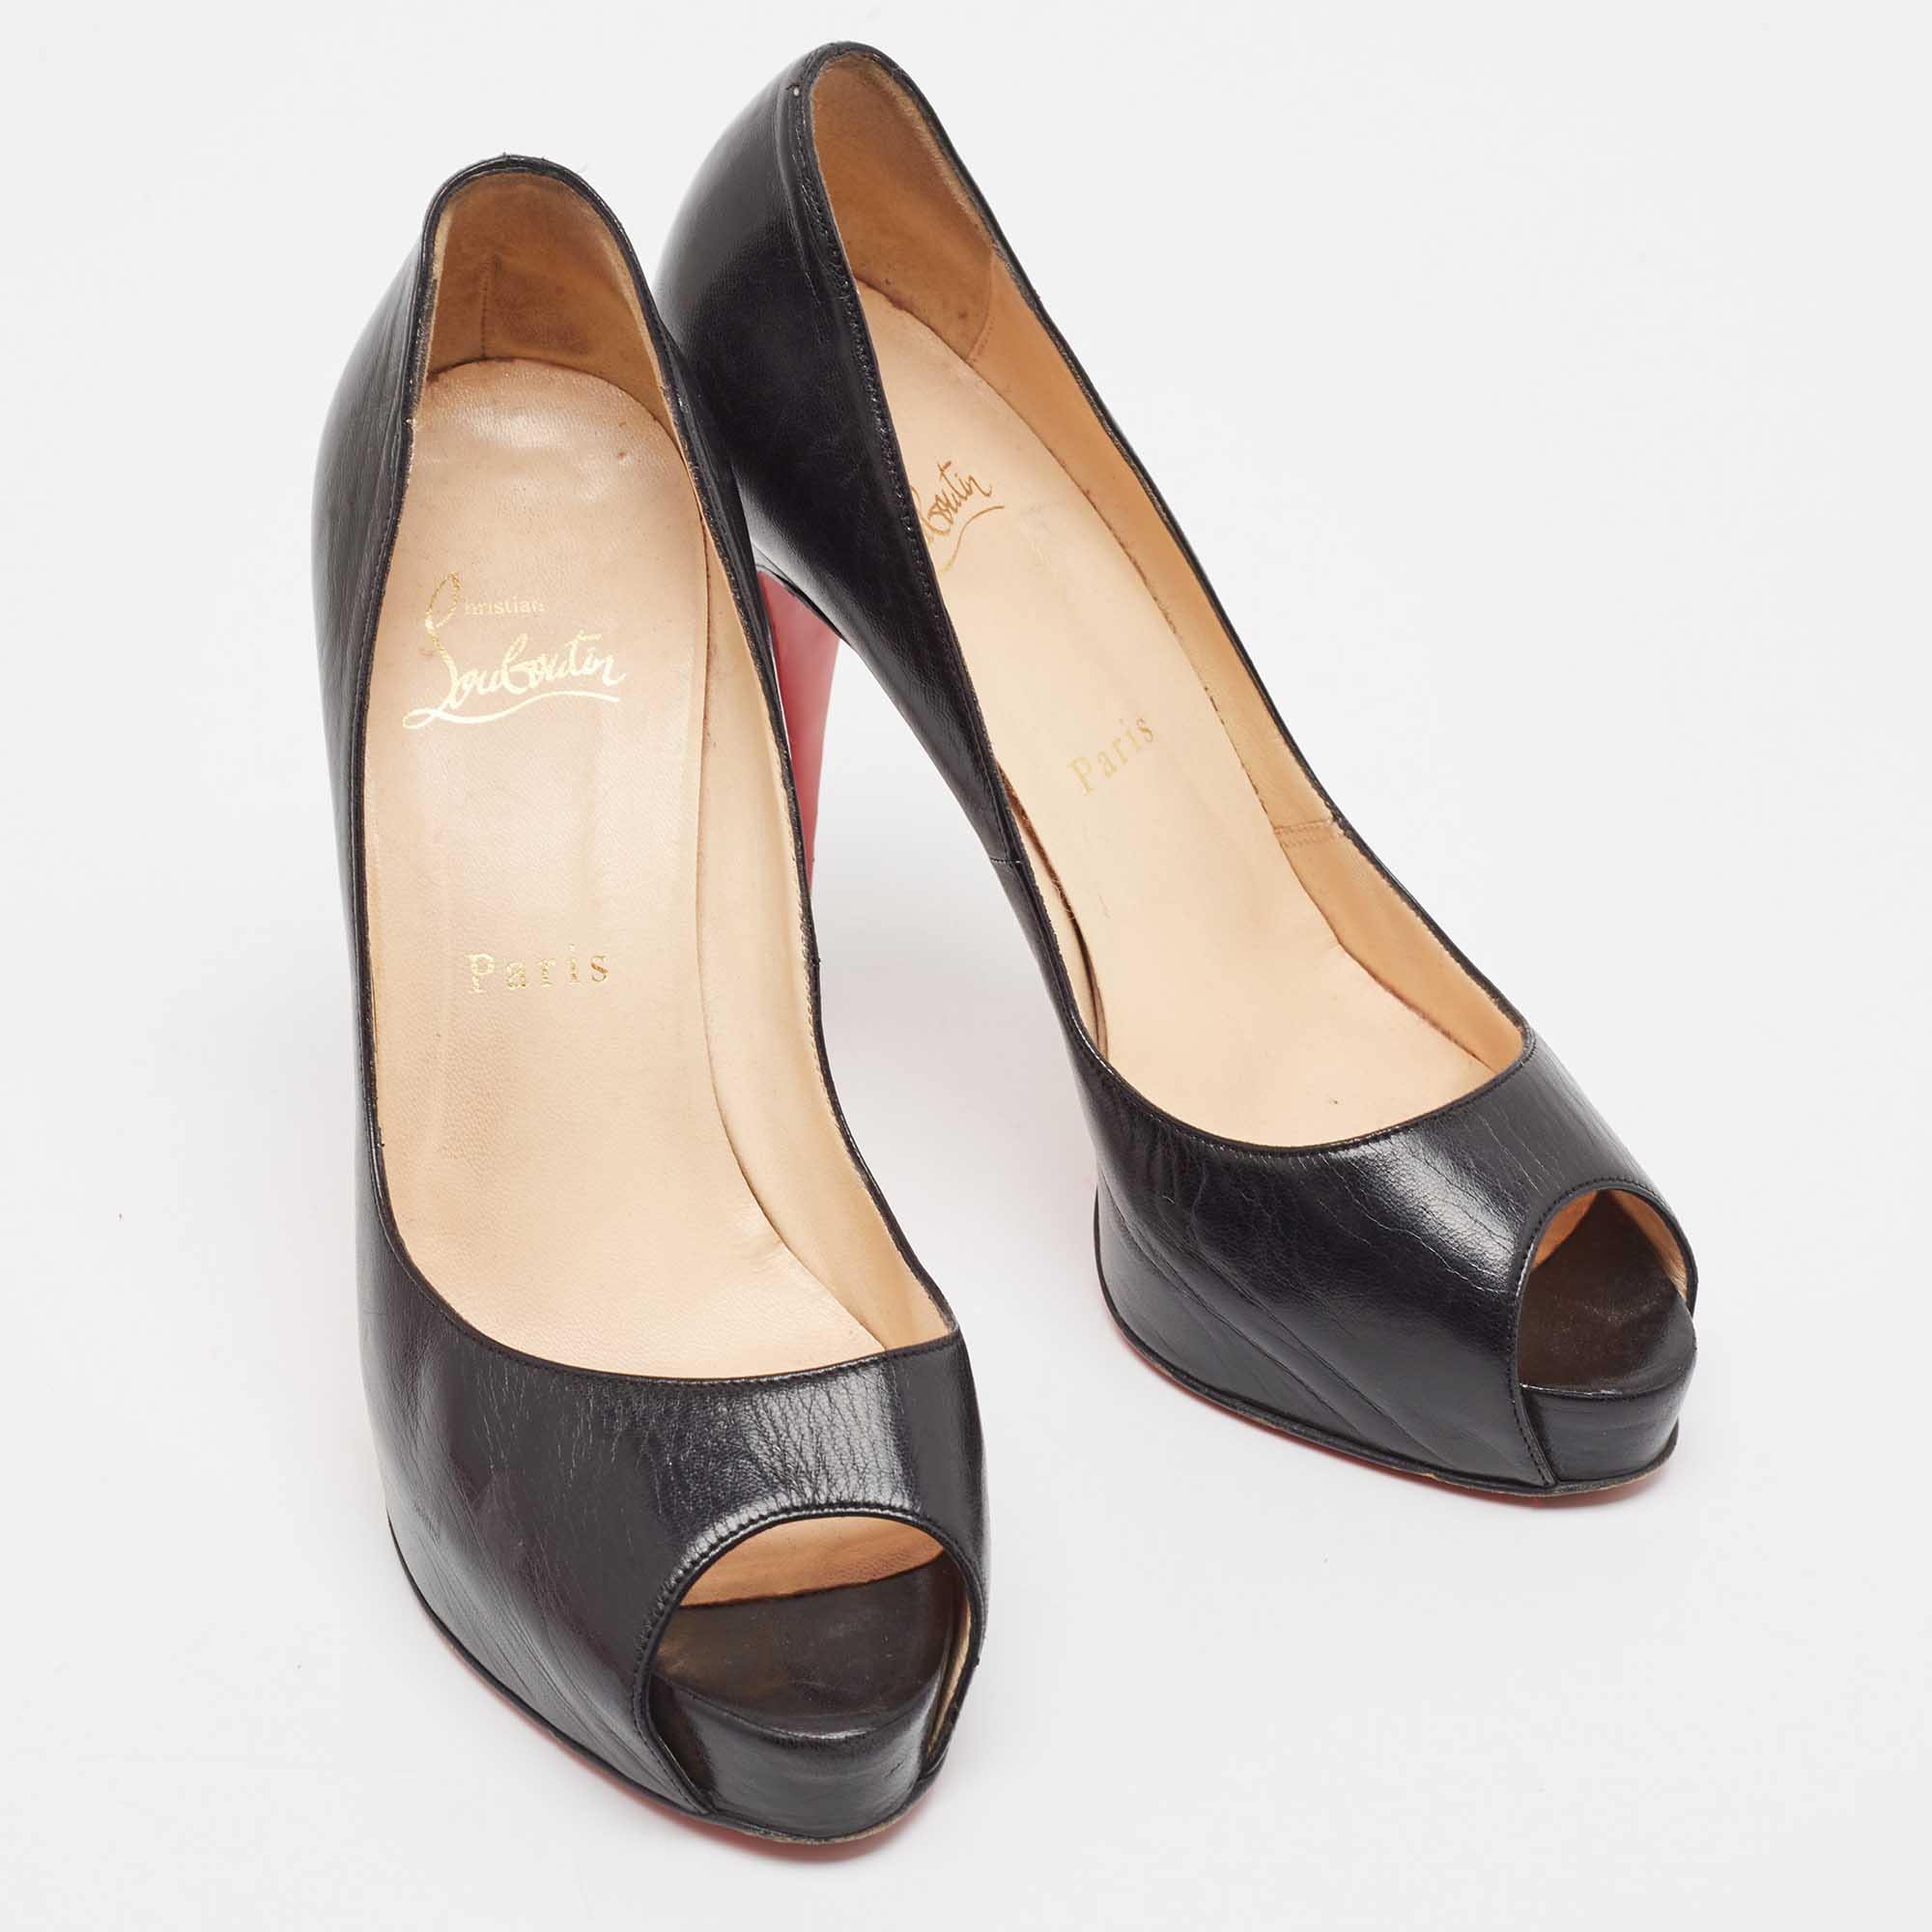 Christian Louboutin Black Leather Very Prive Pumps Size 37.5